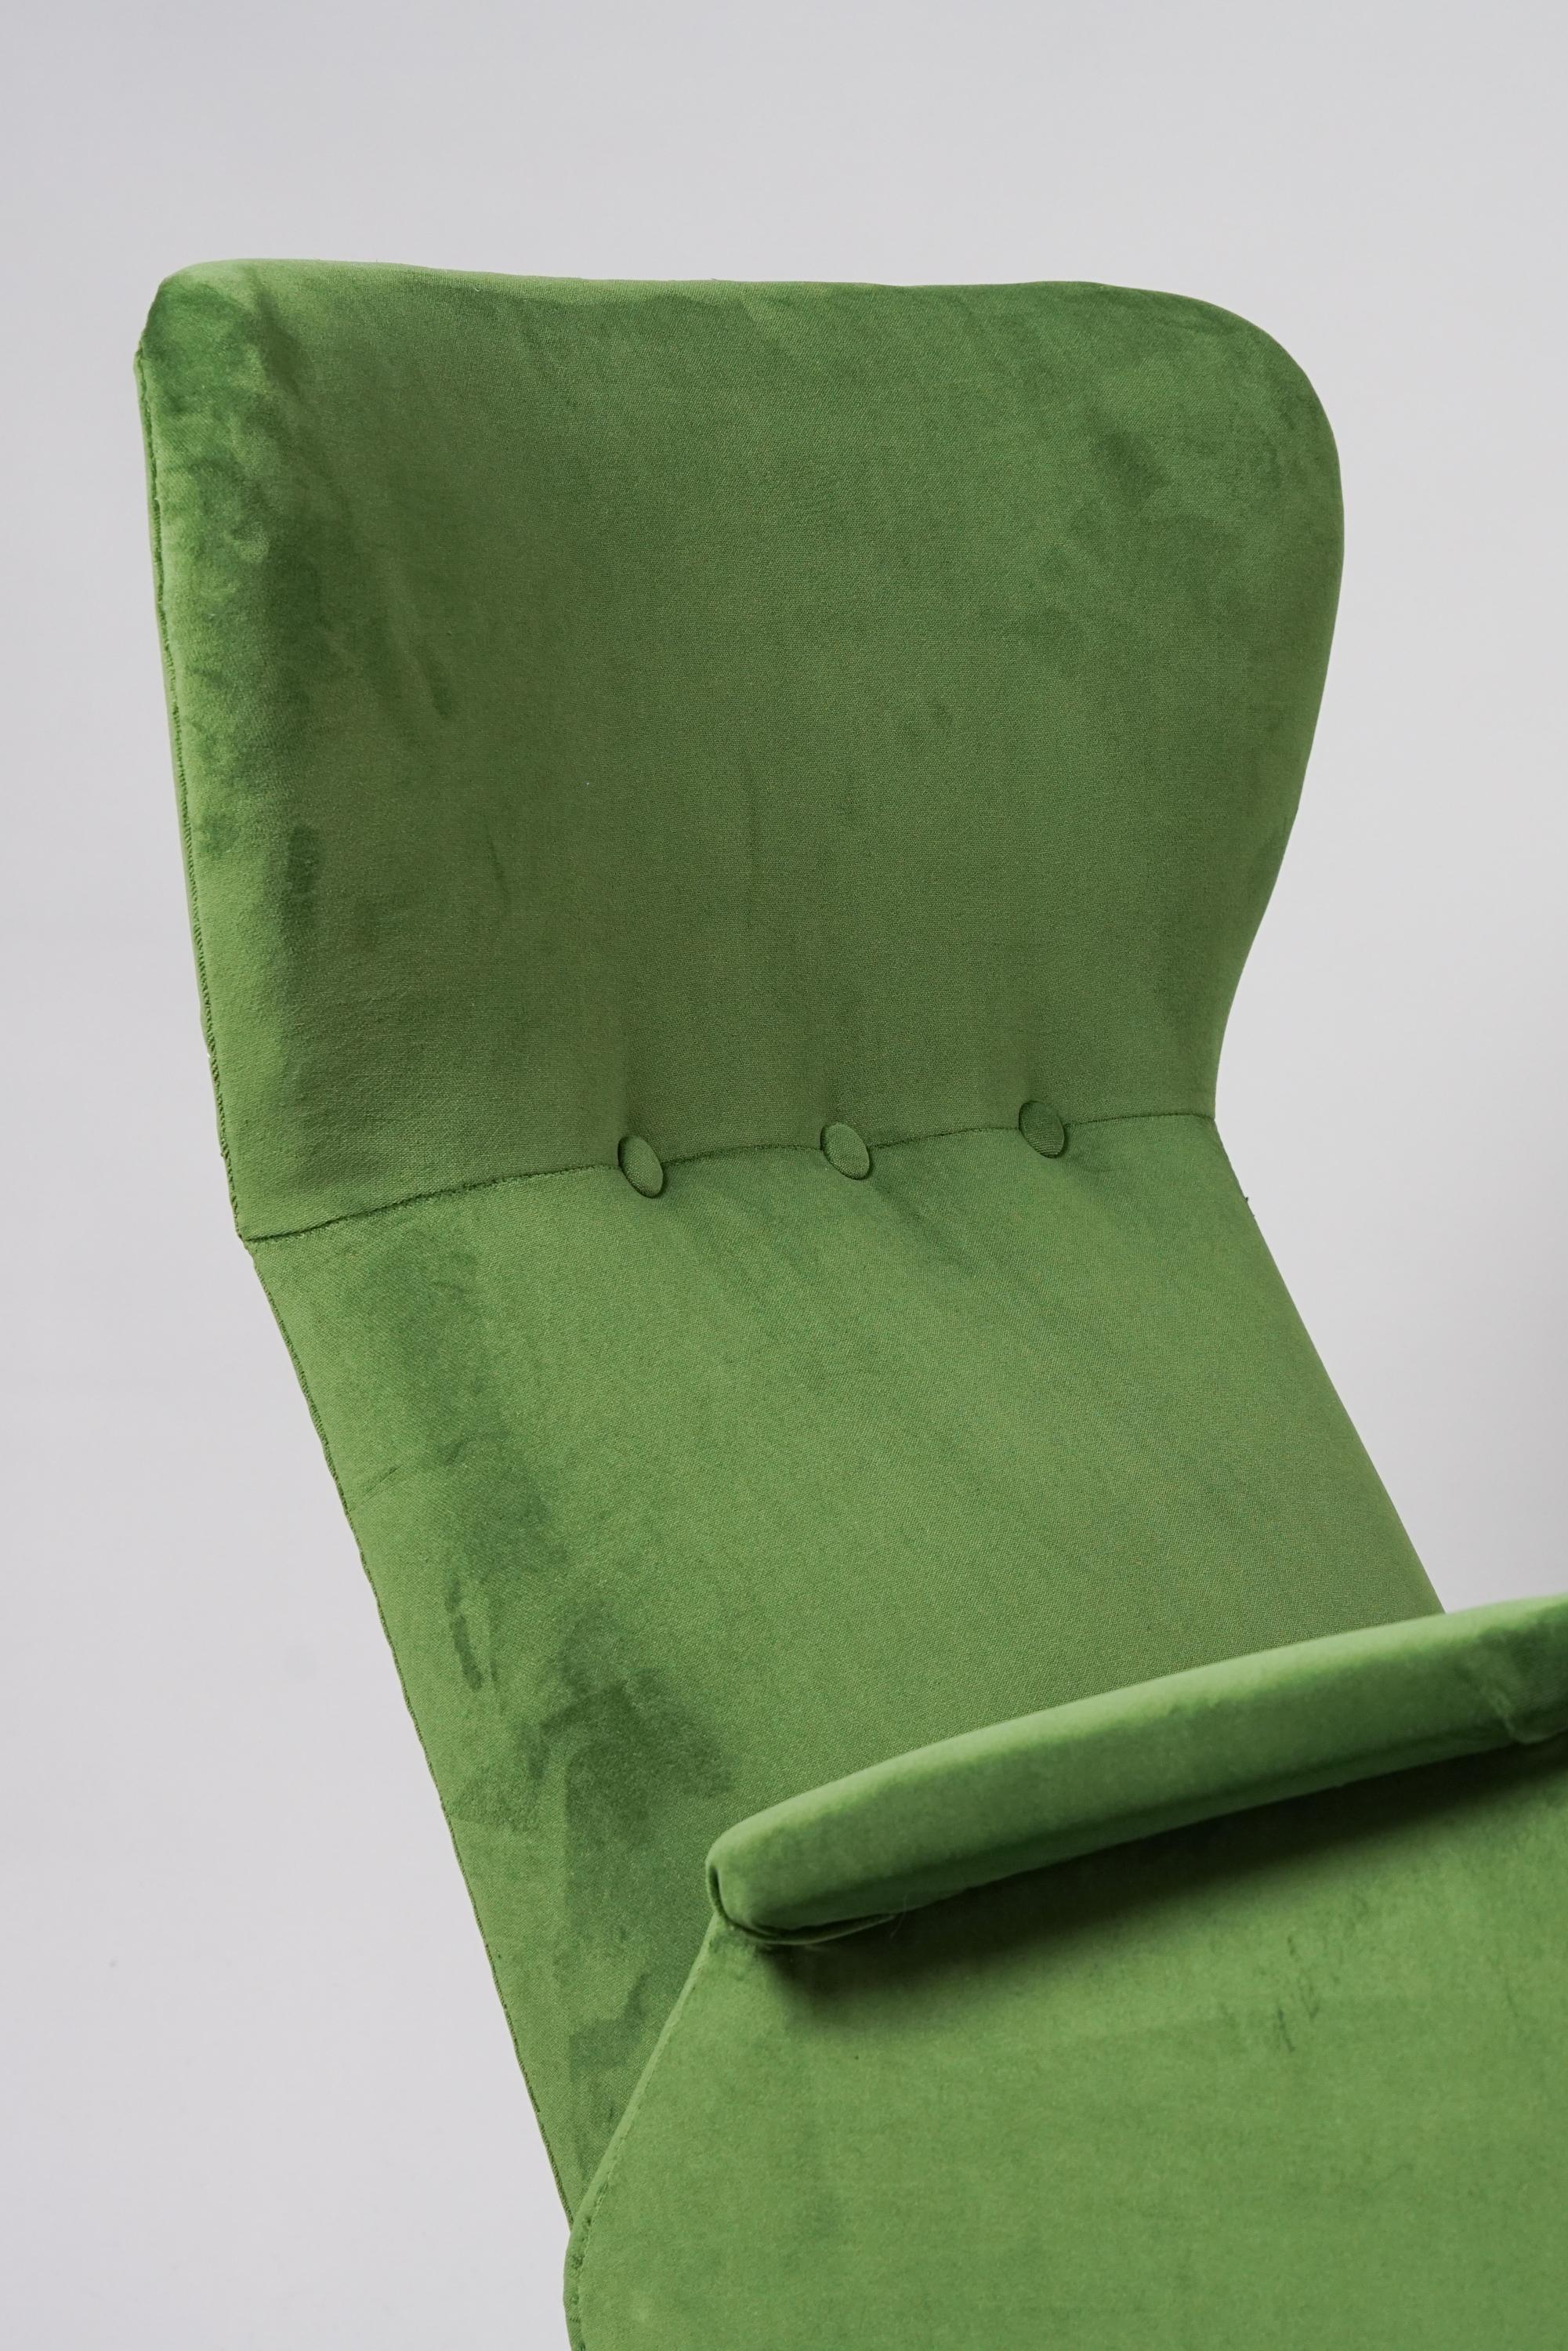 Finnish Lounge Chair, Carl Gustaf Hiort af Ornäs, Hiort tuote, 1950/1960s  For Sale